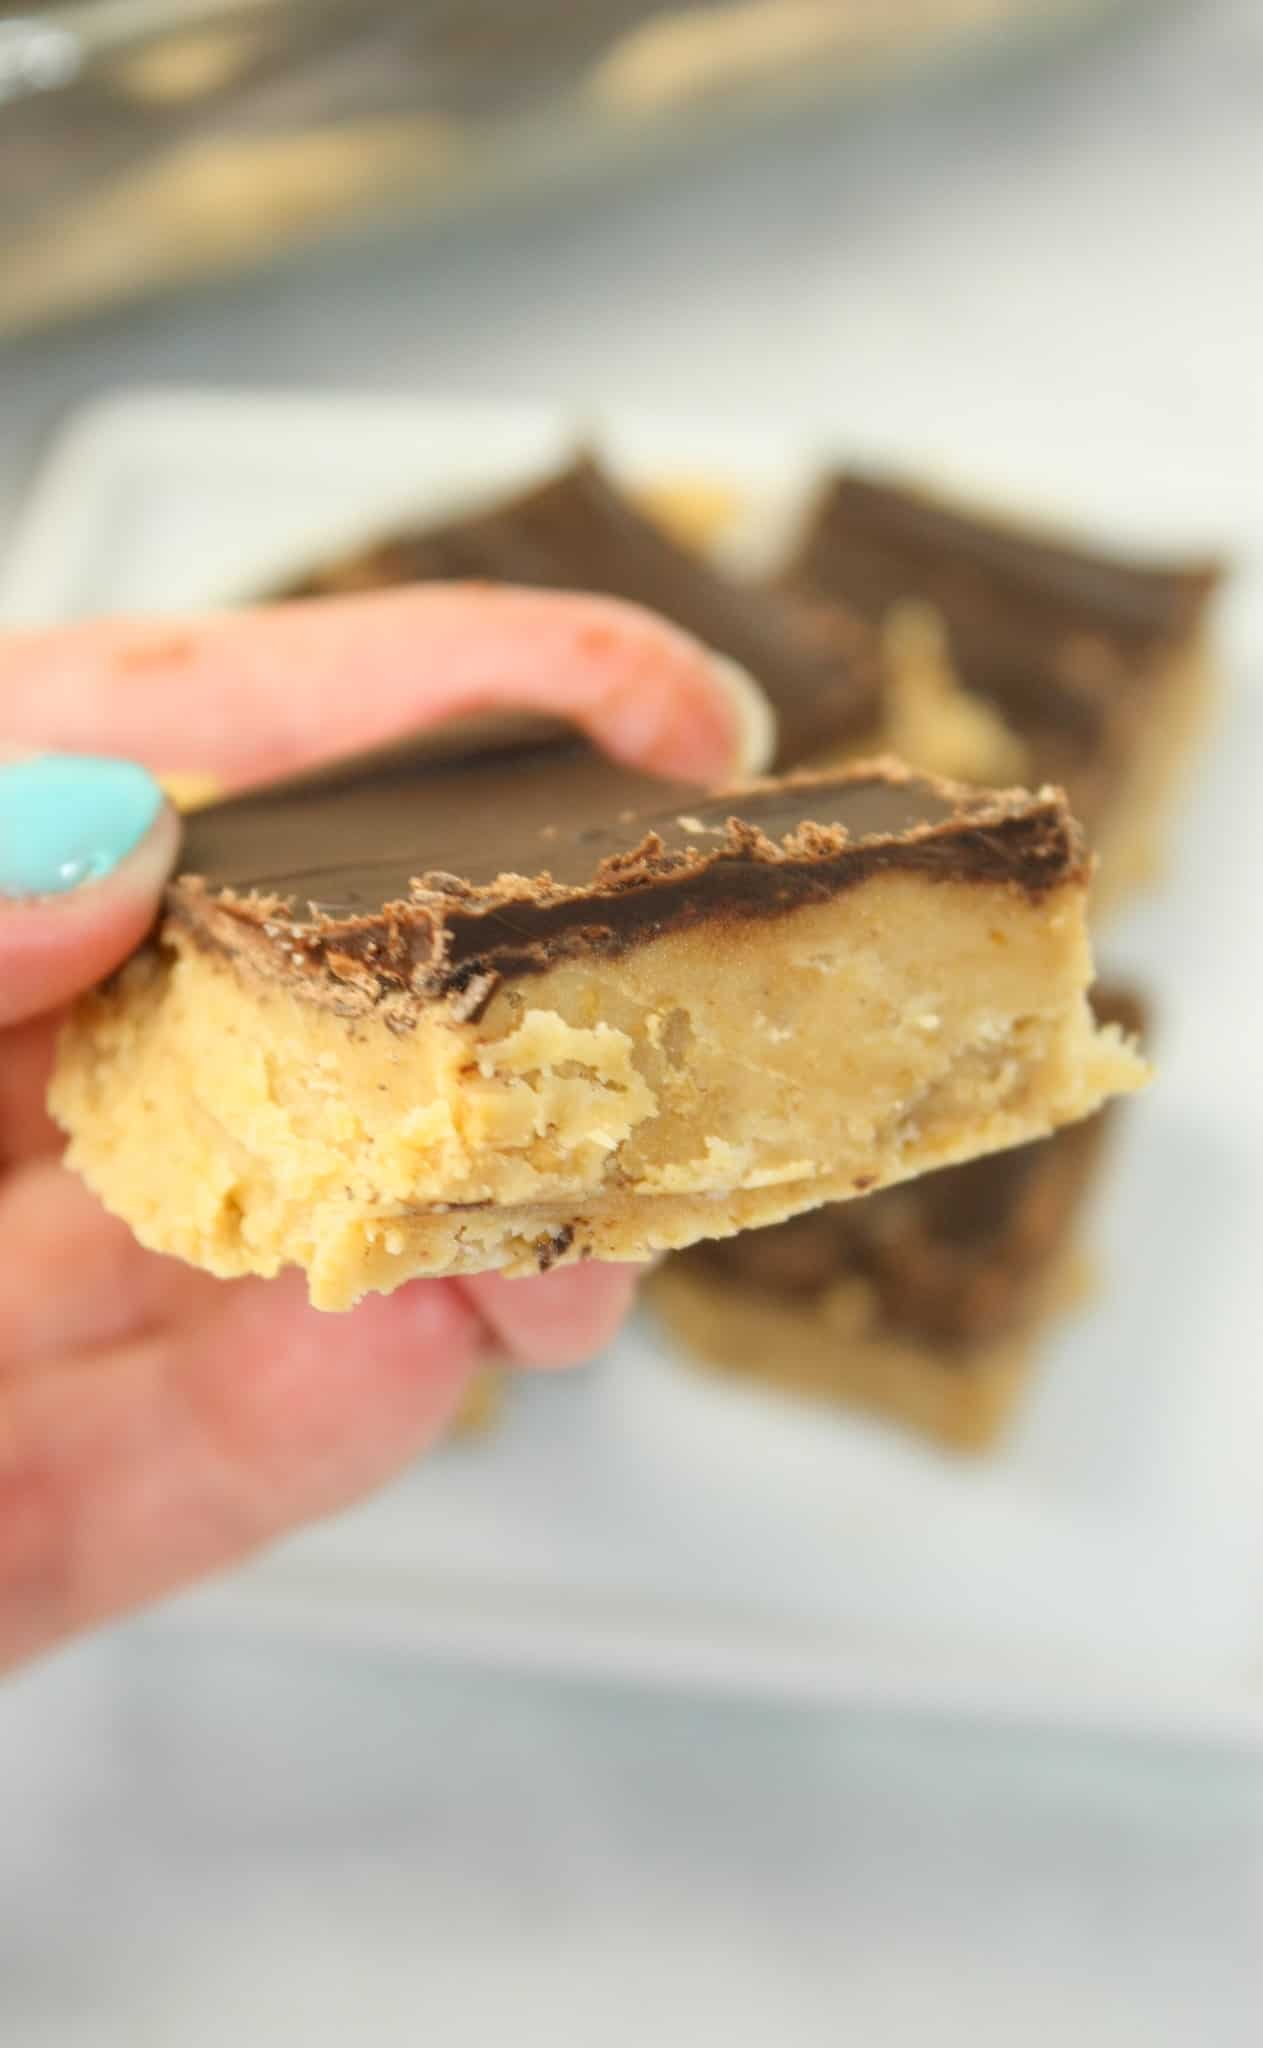 Peanut Butter Cup Squares is a family favourite dessert recipe in our home!  I made some adjustments for this gluten free version so that I could once again enjoy this square recipe and no one noticed the difference!